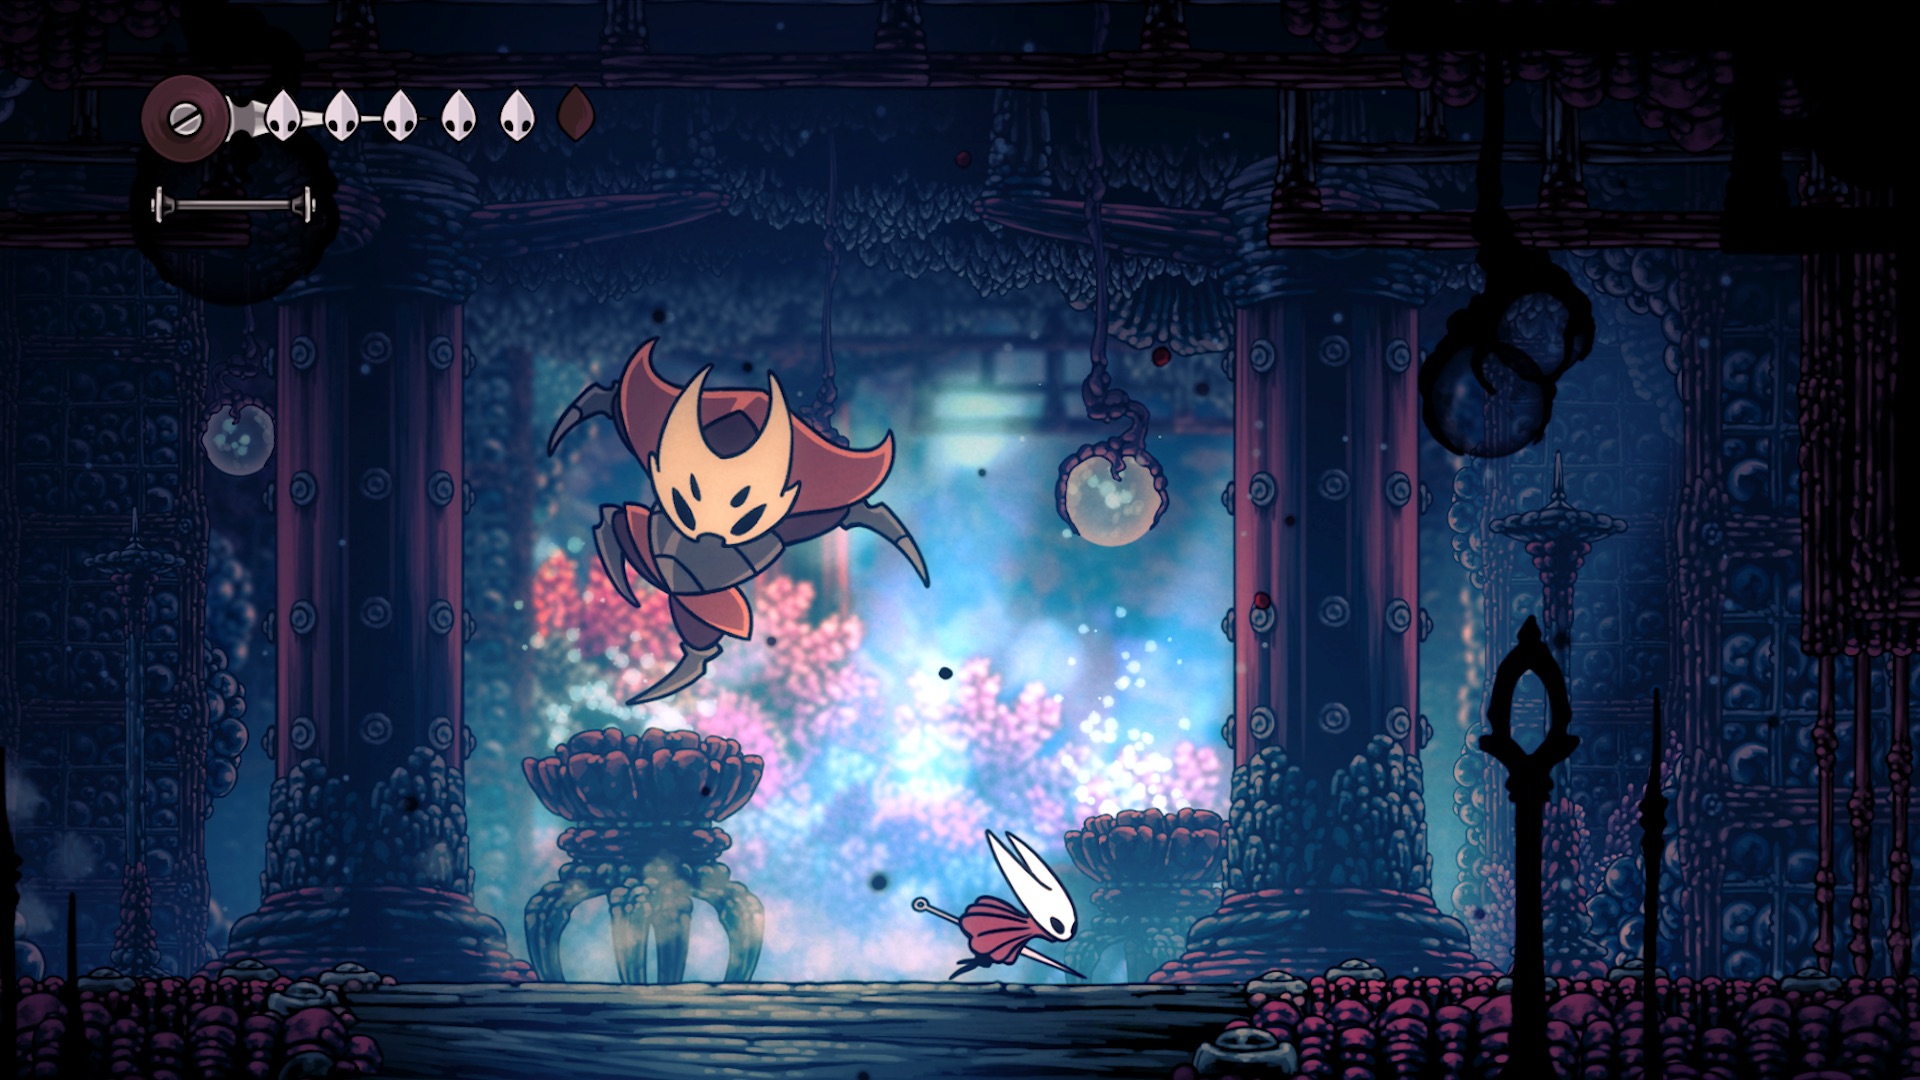 A boss fight in Hollow Knight Silksong